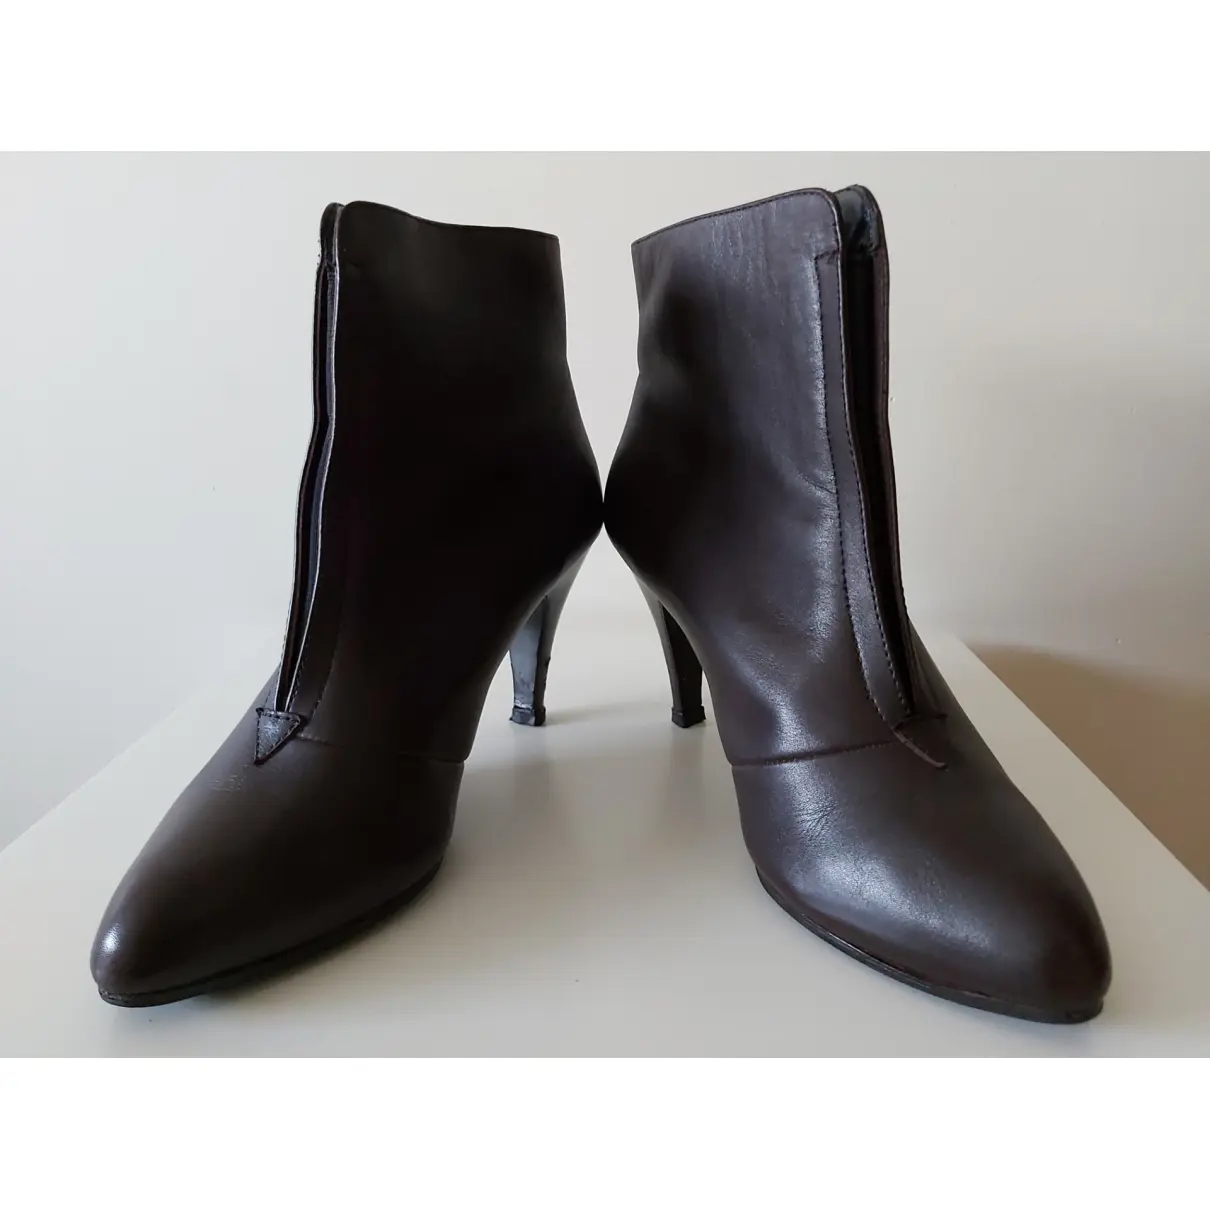 Buy Bimba y Lola Leather ankle boots online